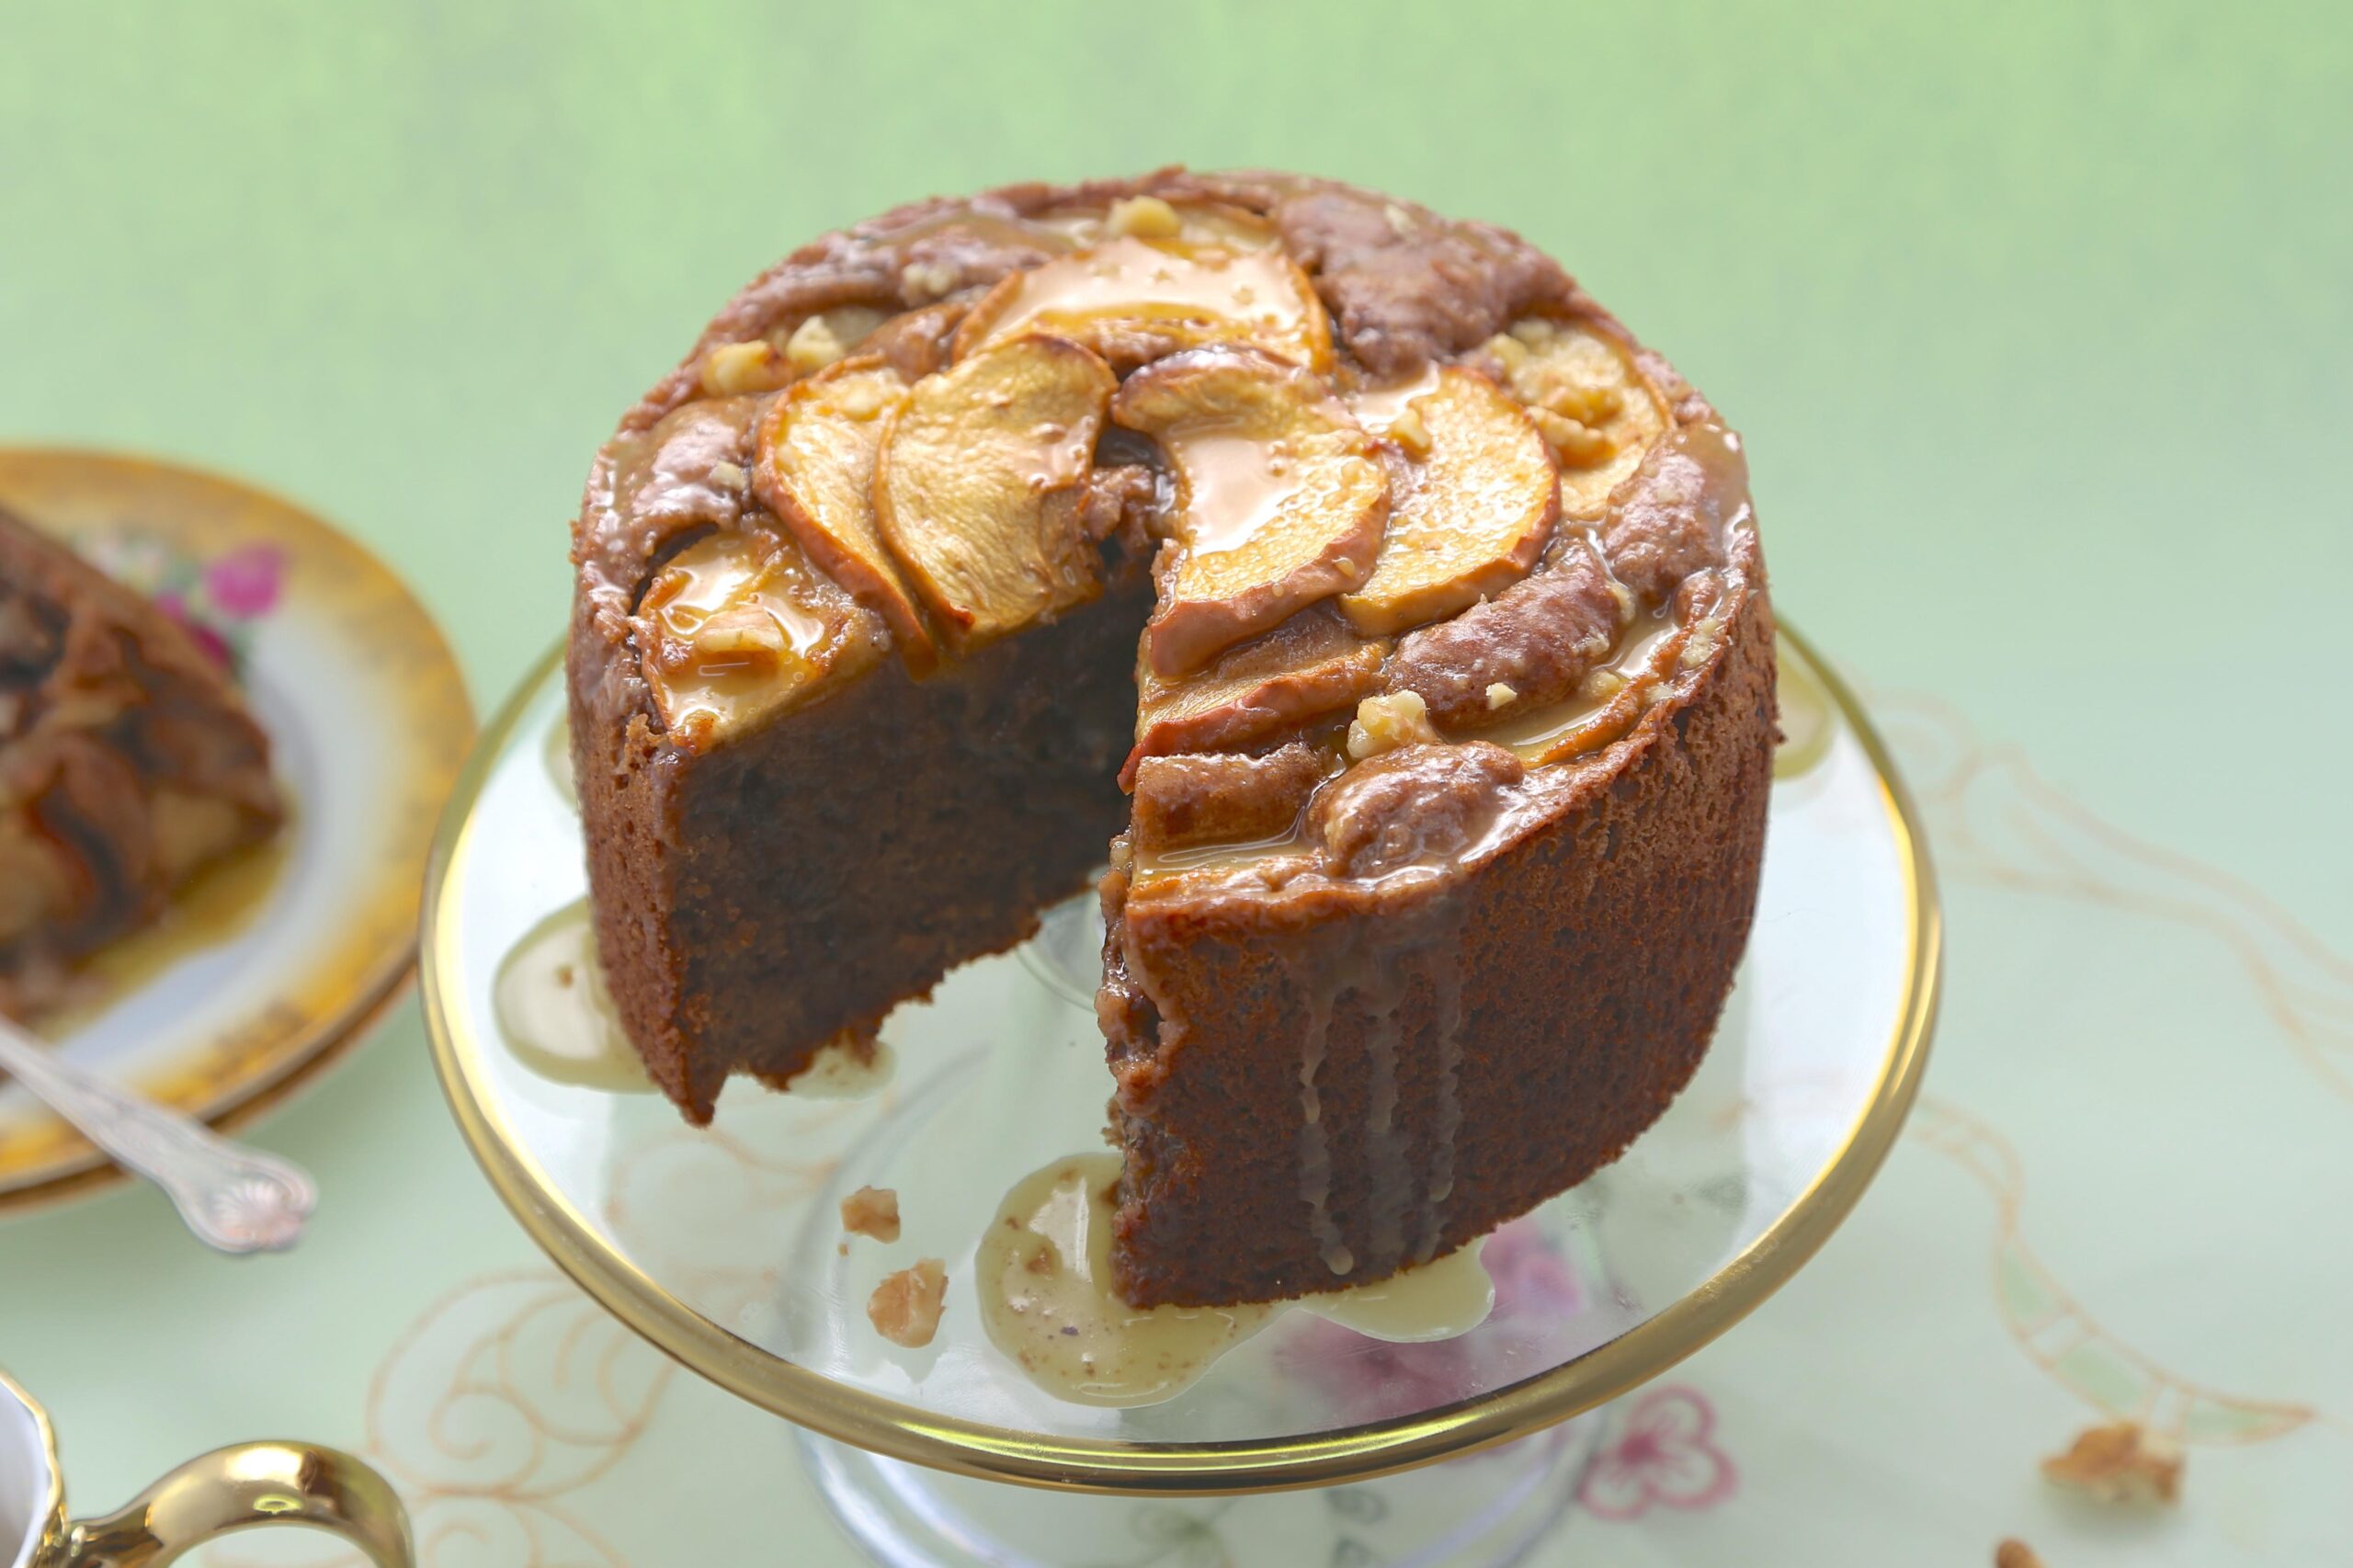  Decadent yet healthy, this cake will satisfy all your cravings.